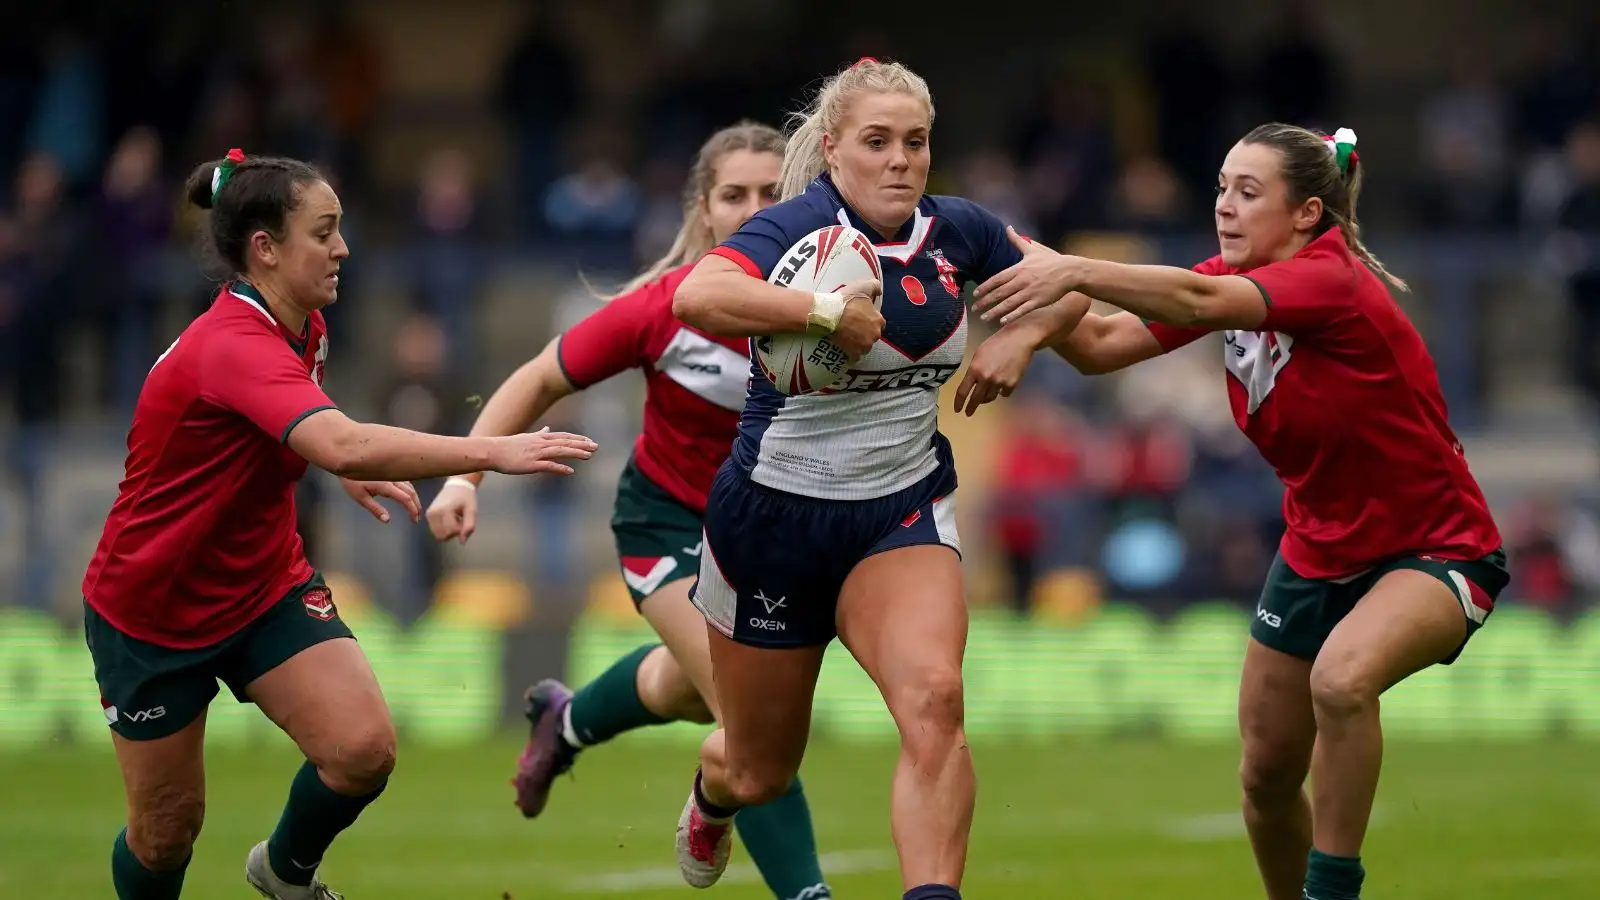 Leeds Rhinos and England star takes up coaching role with Championship club: ‘I’m very passionate about the next generation’